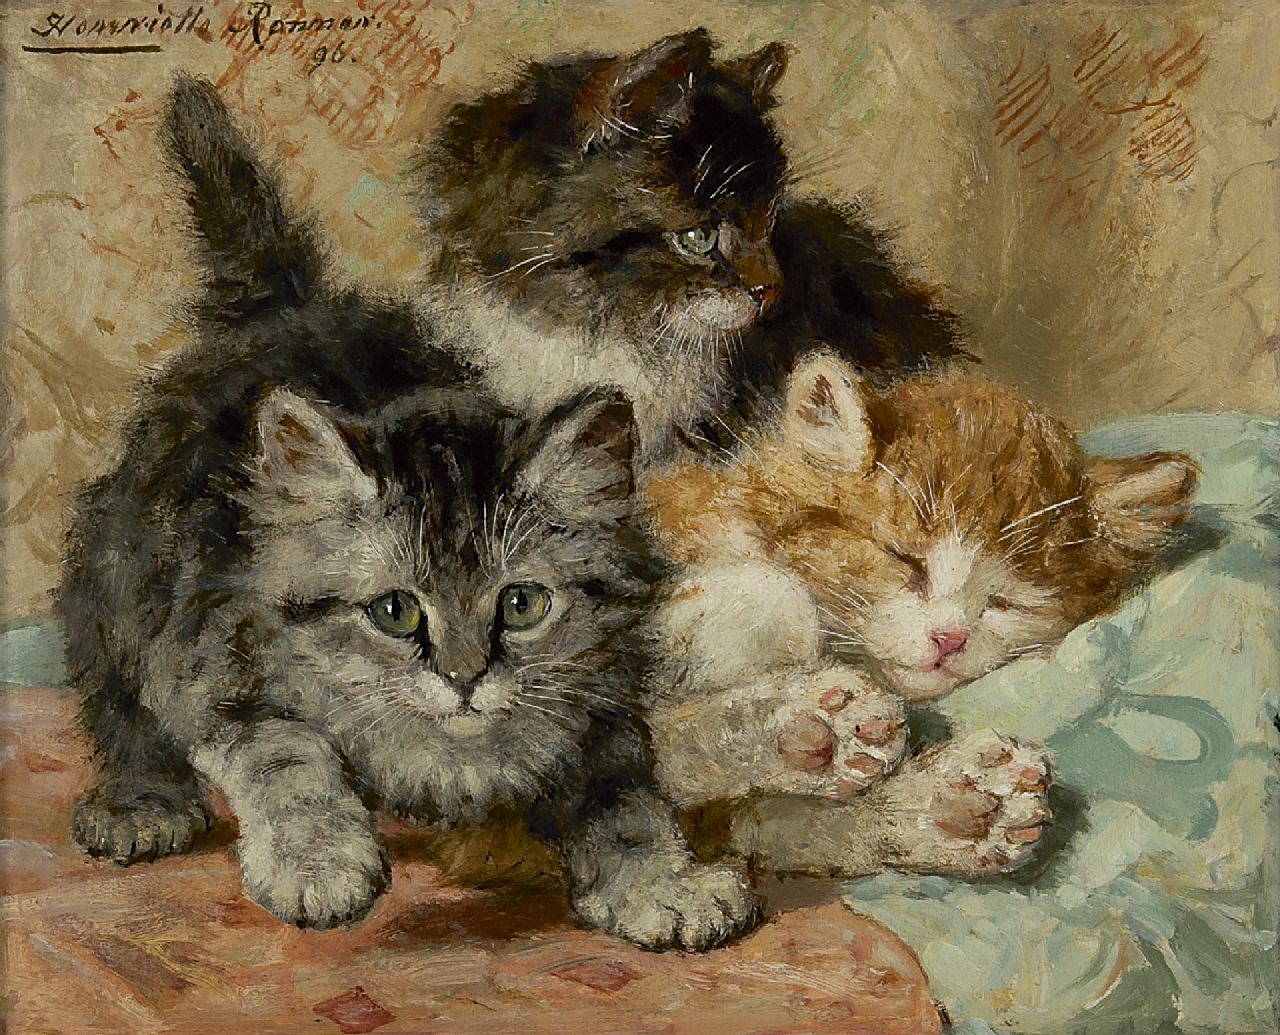 Ronner-Knip H.  | Henriette Ronner-Knip, Three cats, oil on panel 19.6 x 23.6 cm, signed u.l. and dated '96